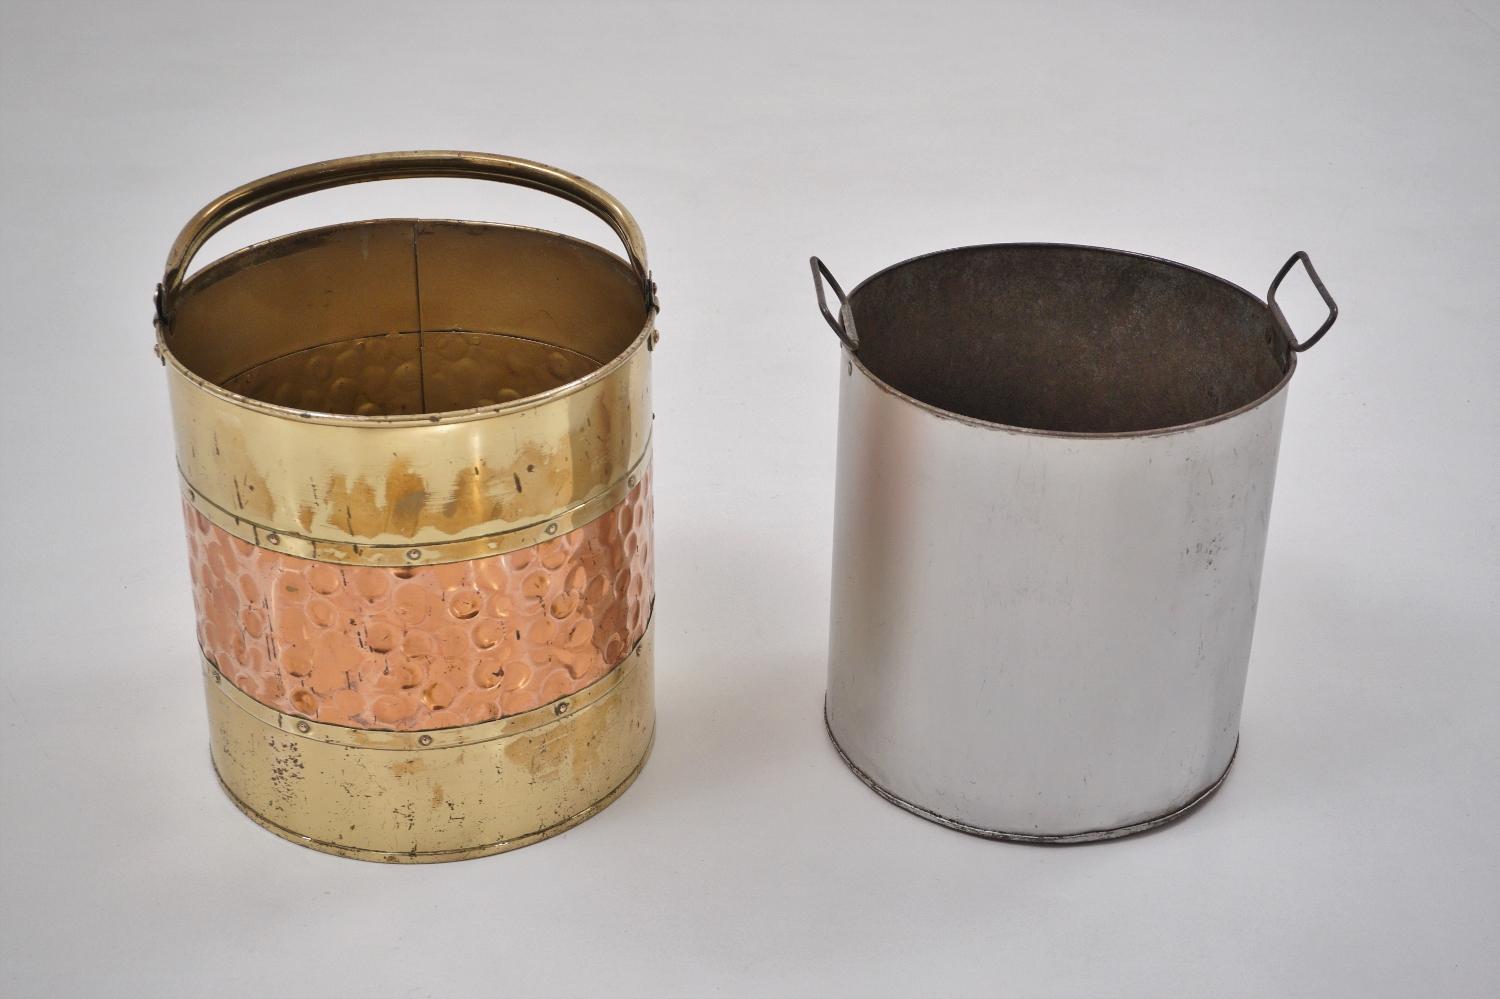 Antique Brass Bucket/Bin 'Coal Scuttle' with Copper Banding, circa 1900s English For Sale 4